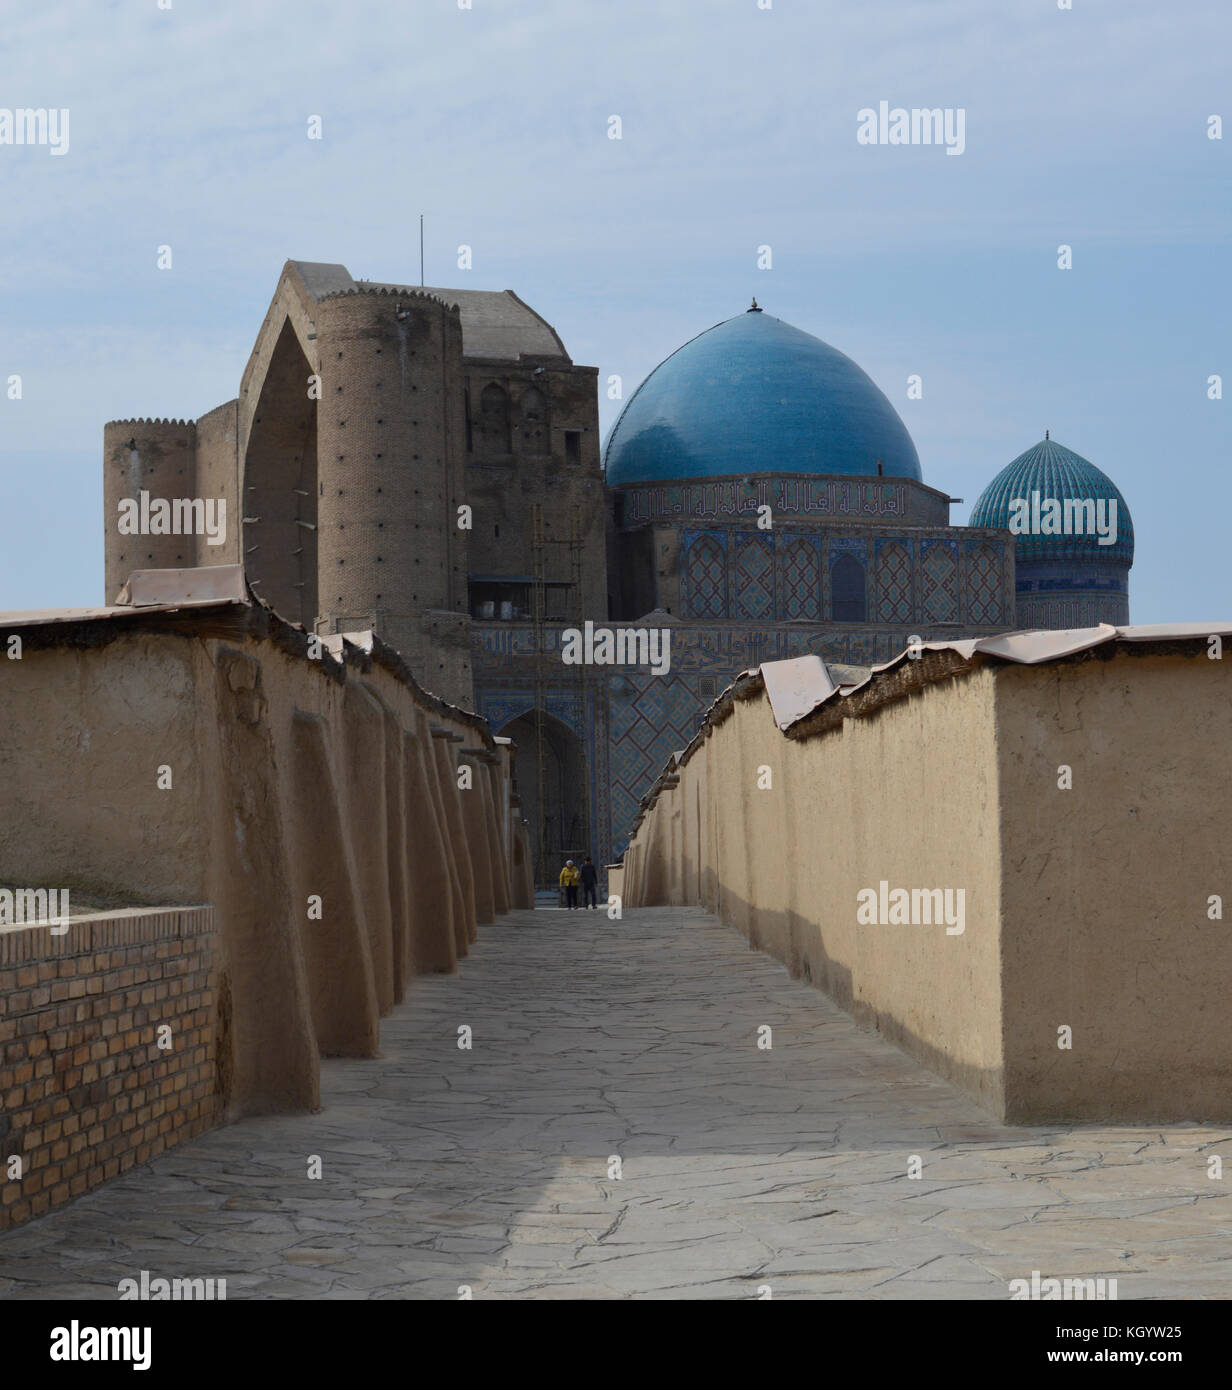 Turkestan, Turkistan is an ancient city in Kazakhstan with archelogic record dating back to the 4th century. Many mausoleums; Khwaja Ahmad Yasavi Stock Photo